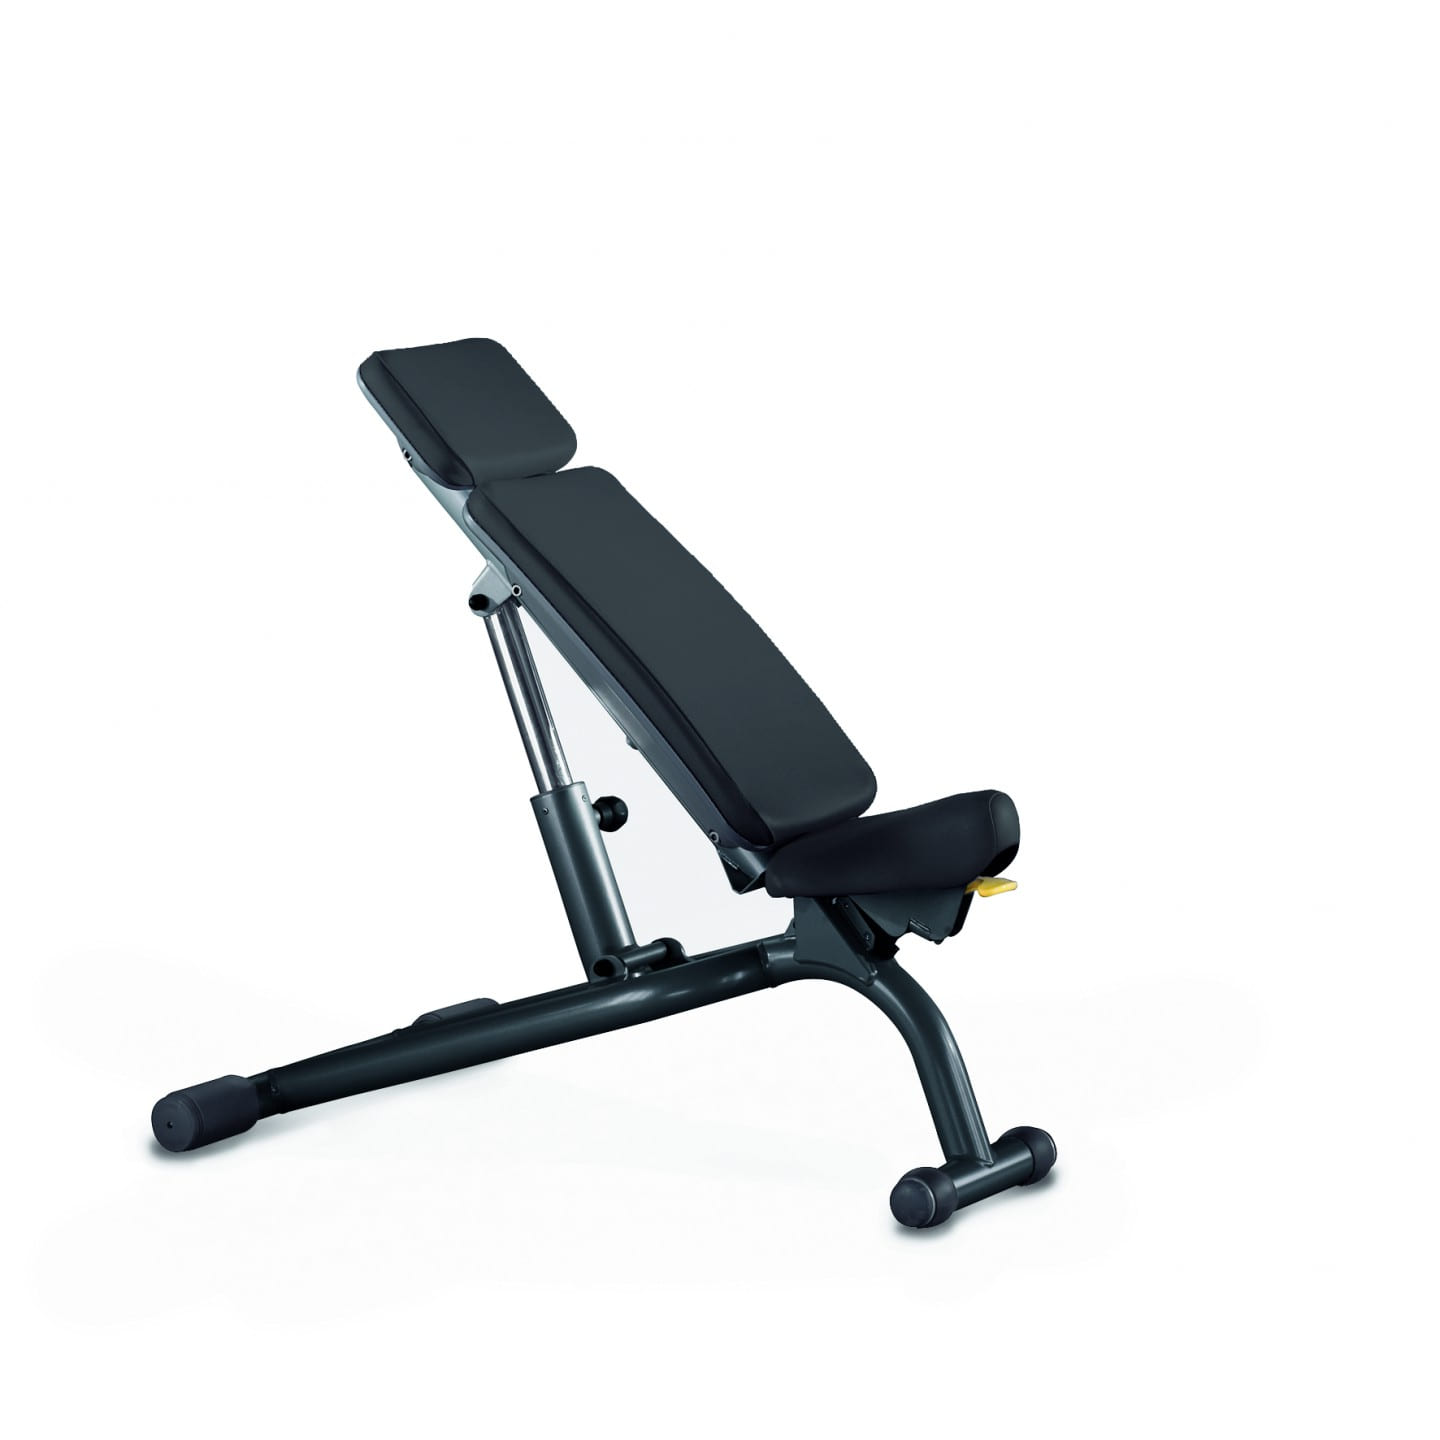 FITNESS BENCHES – ADJUSTABLE BENCH